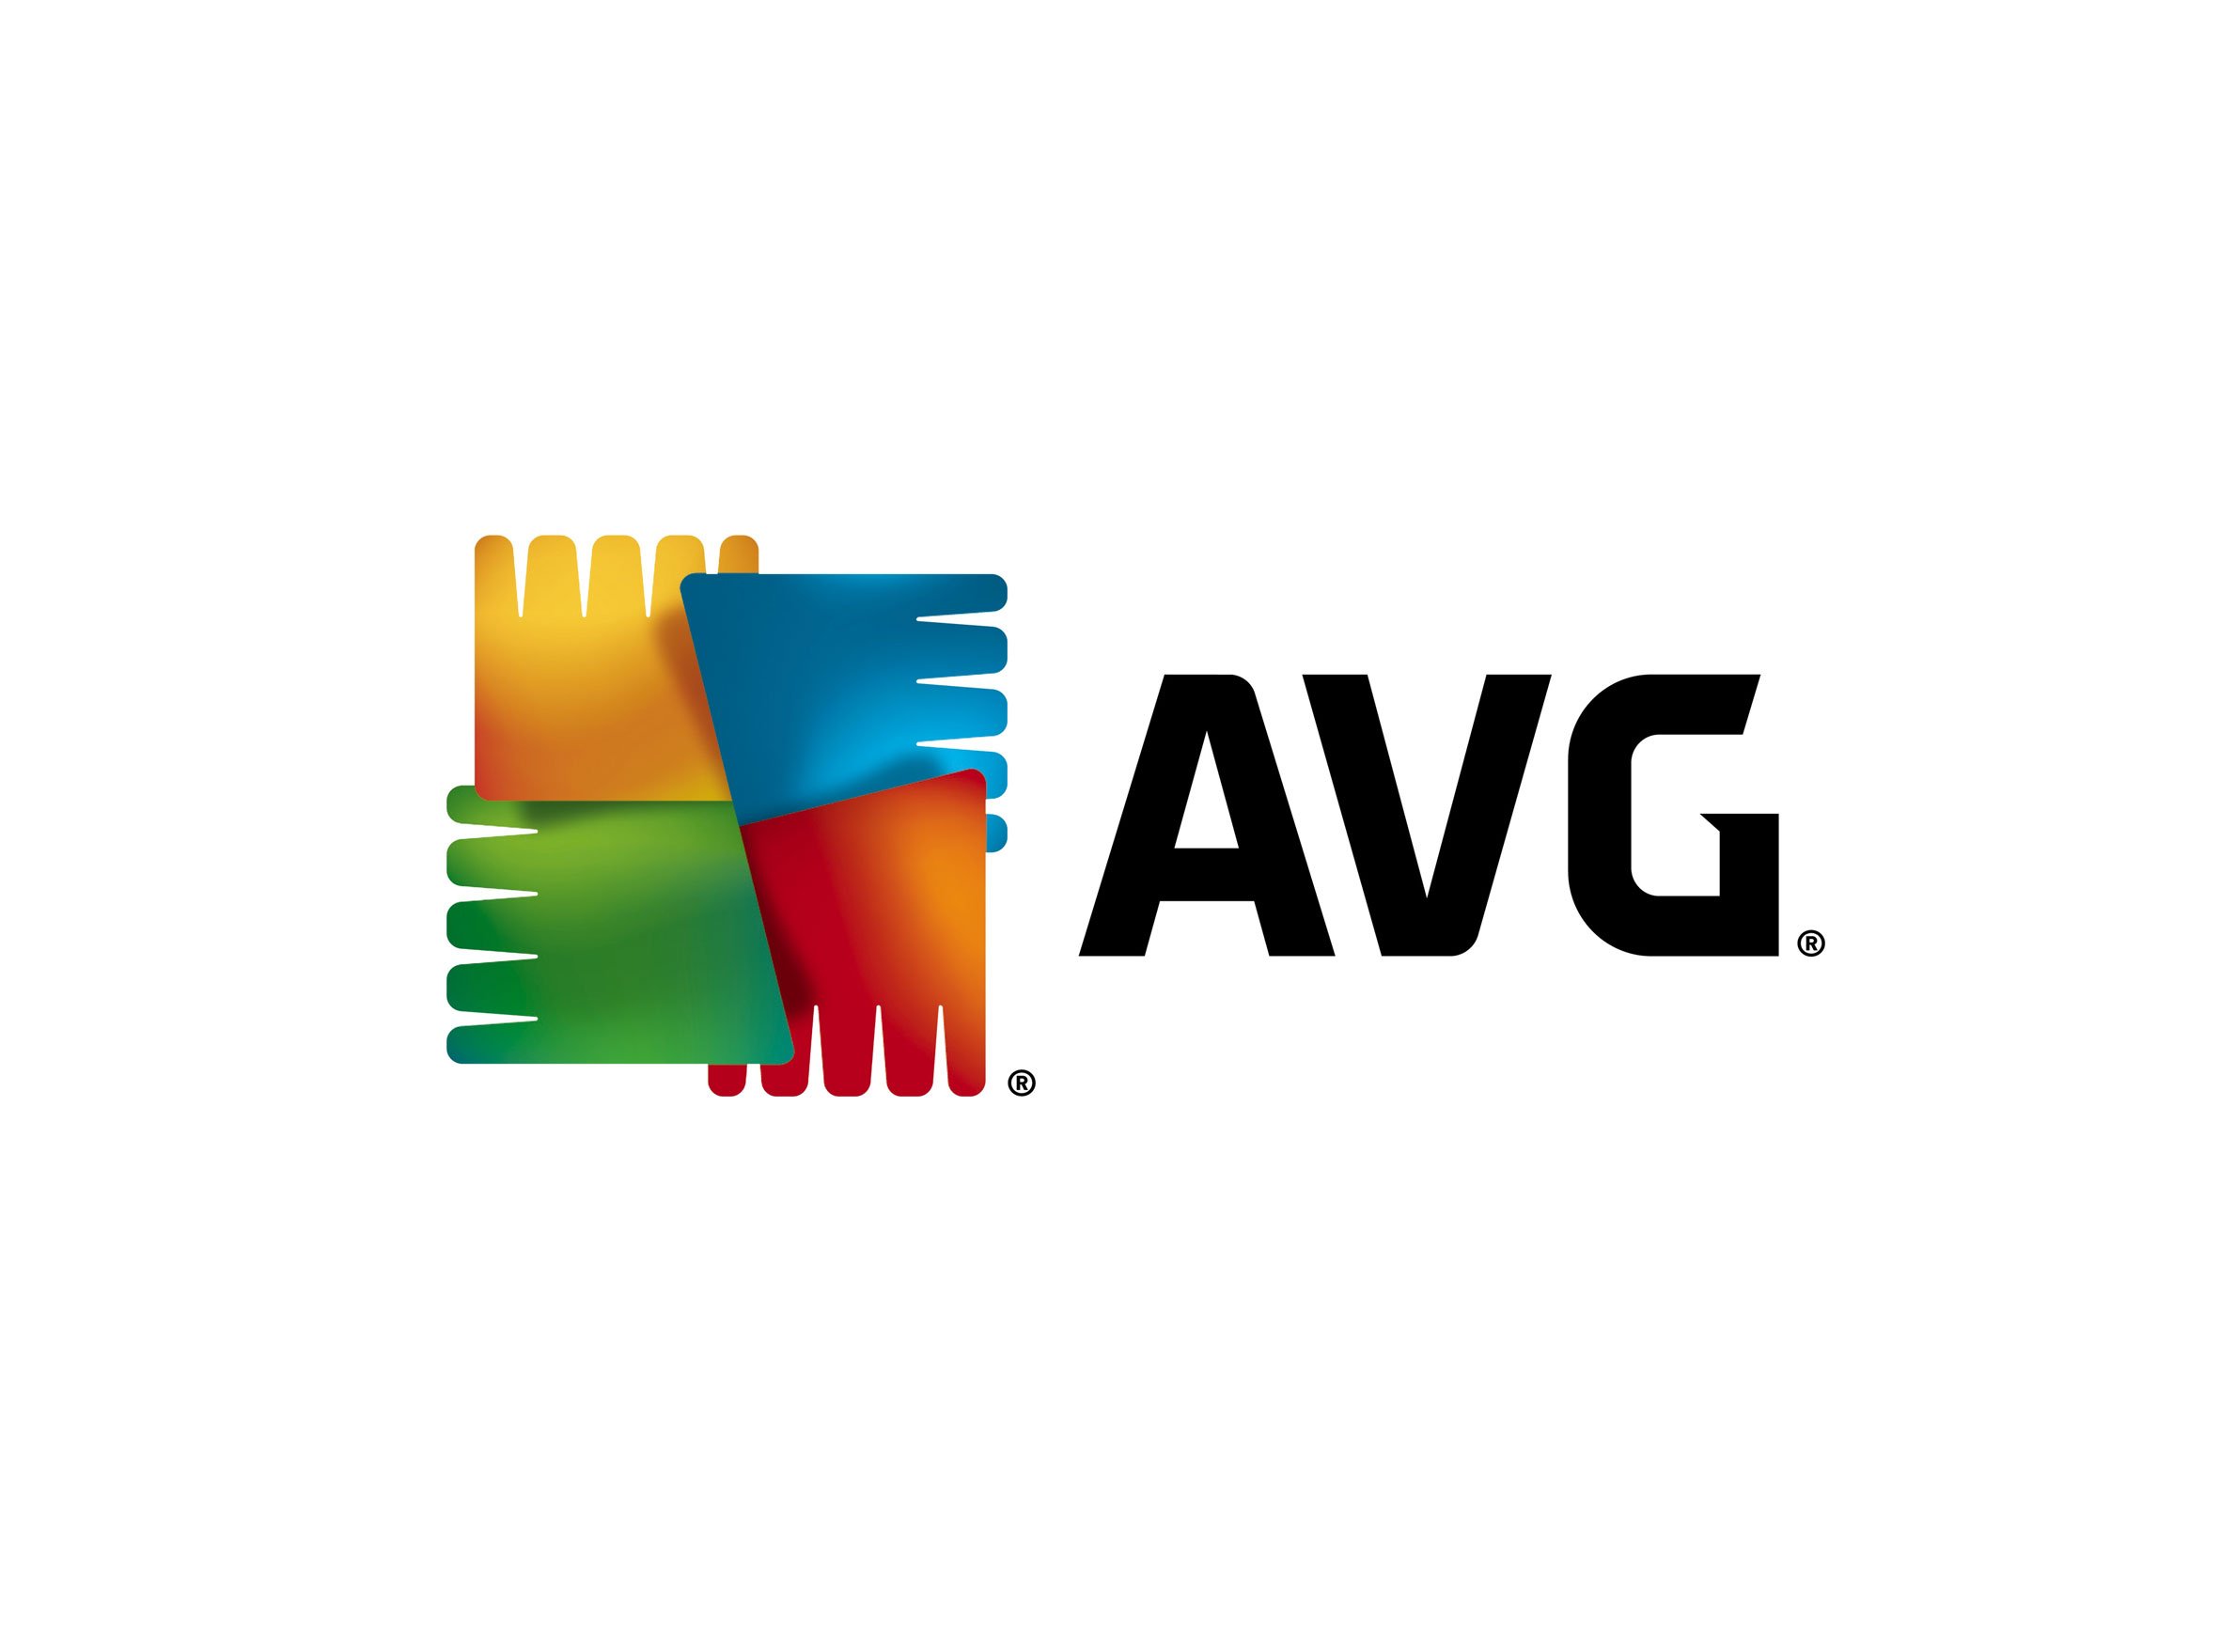  AVG Antivirus Free for Android - Honorable mention